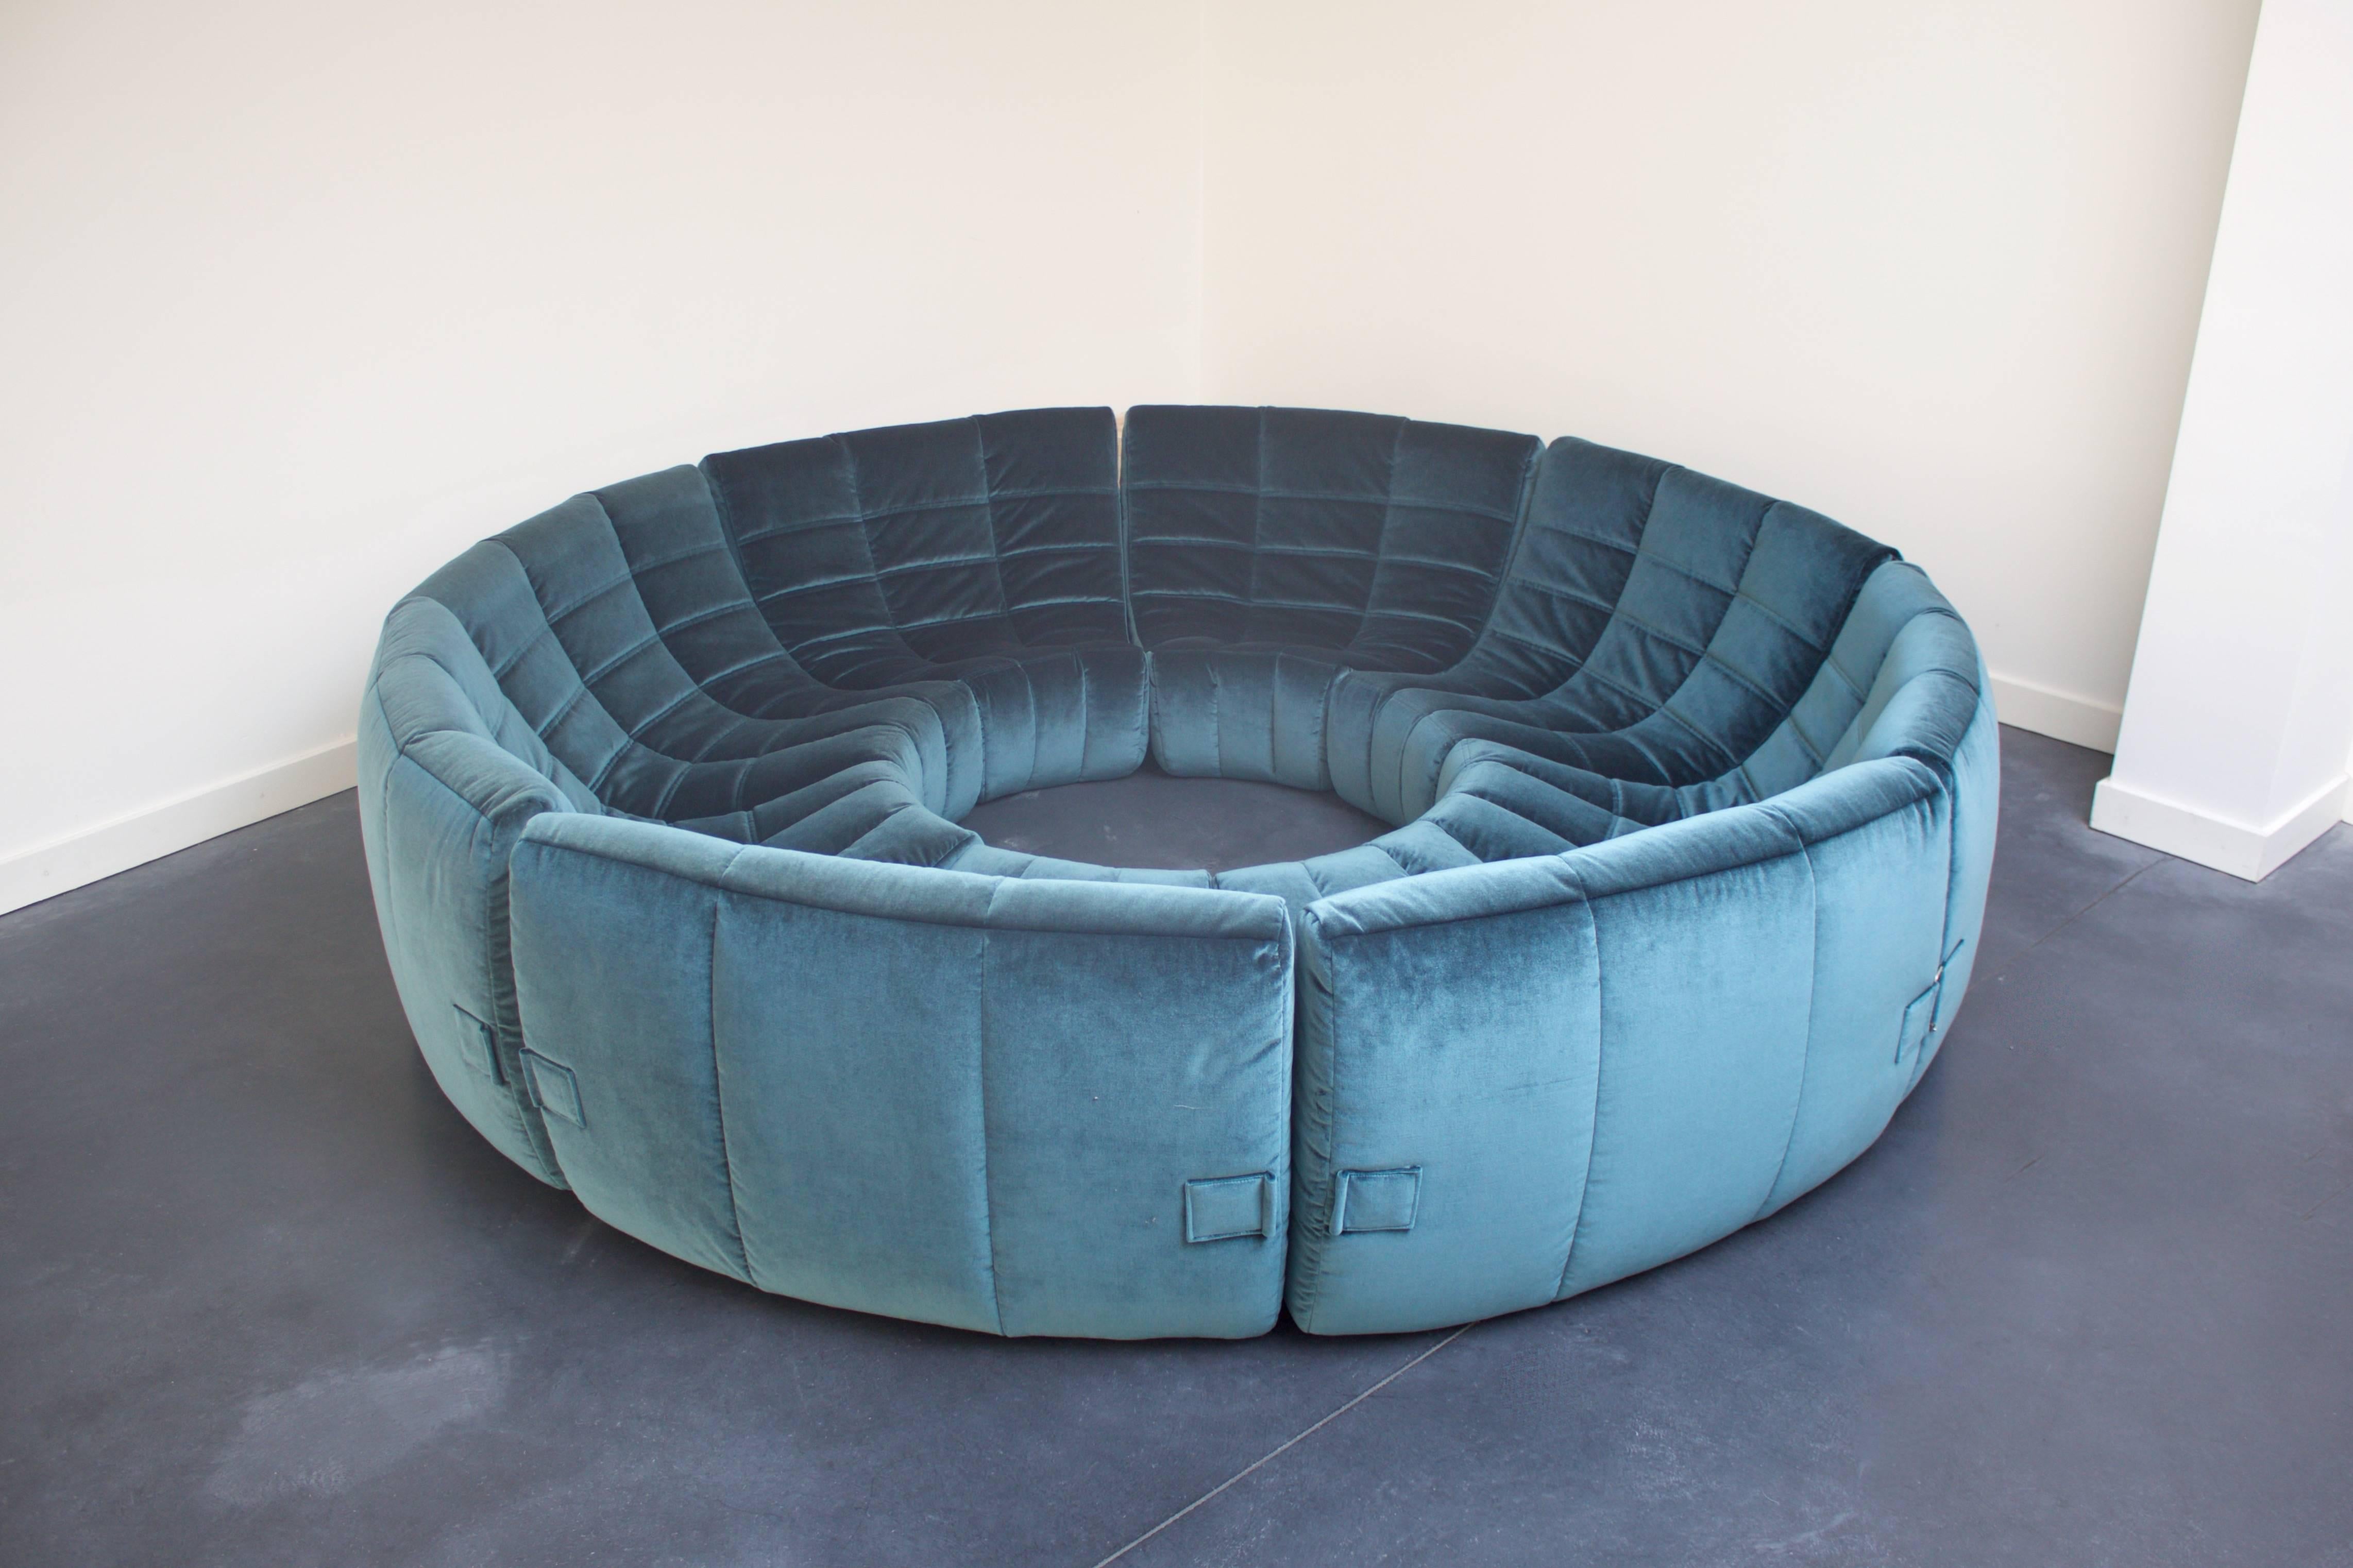 Rare and Exceptional 'Gilda' Circle Sofa in Velvet by Michel Ducaroy, 1972 For Sale 1